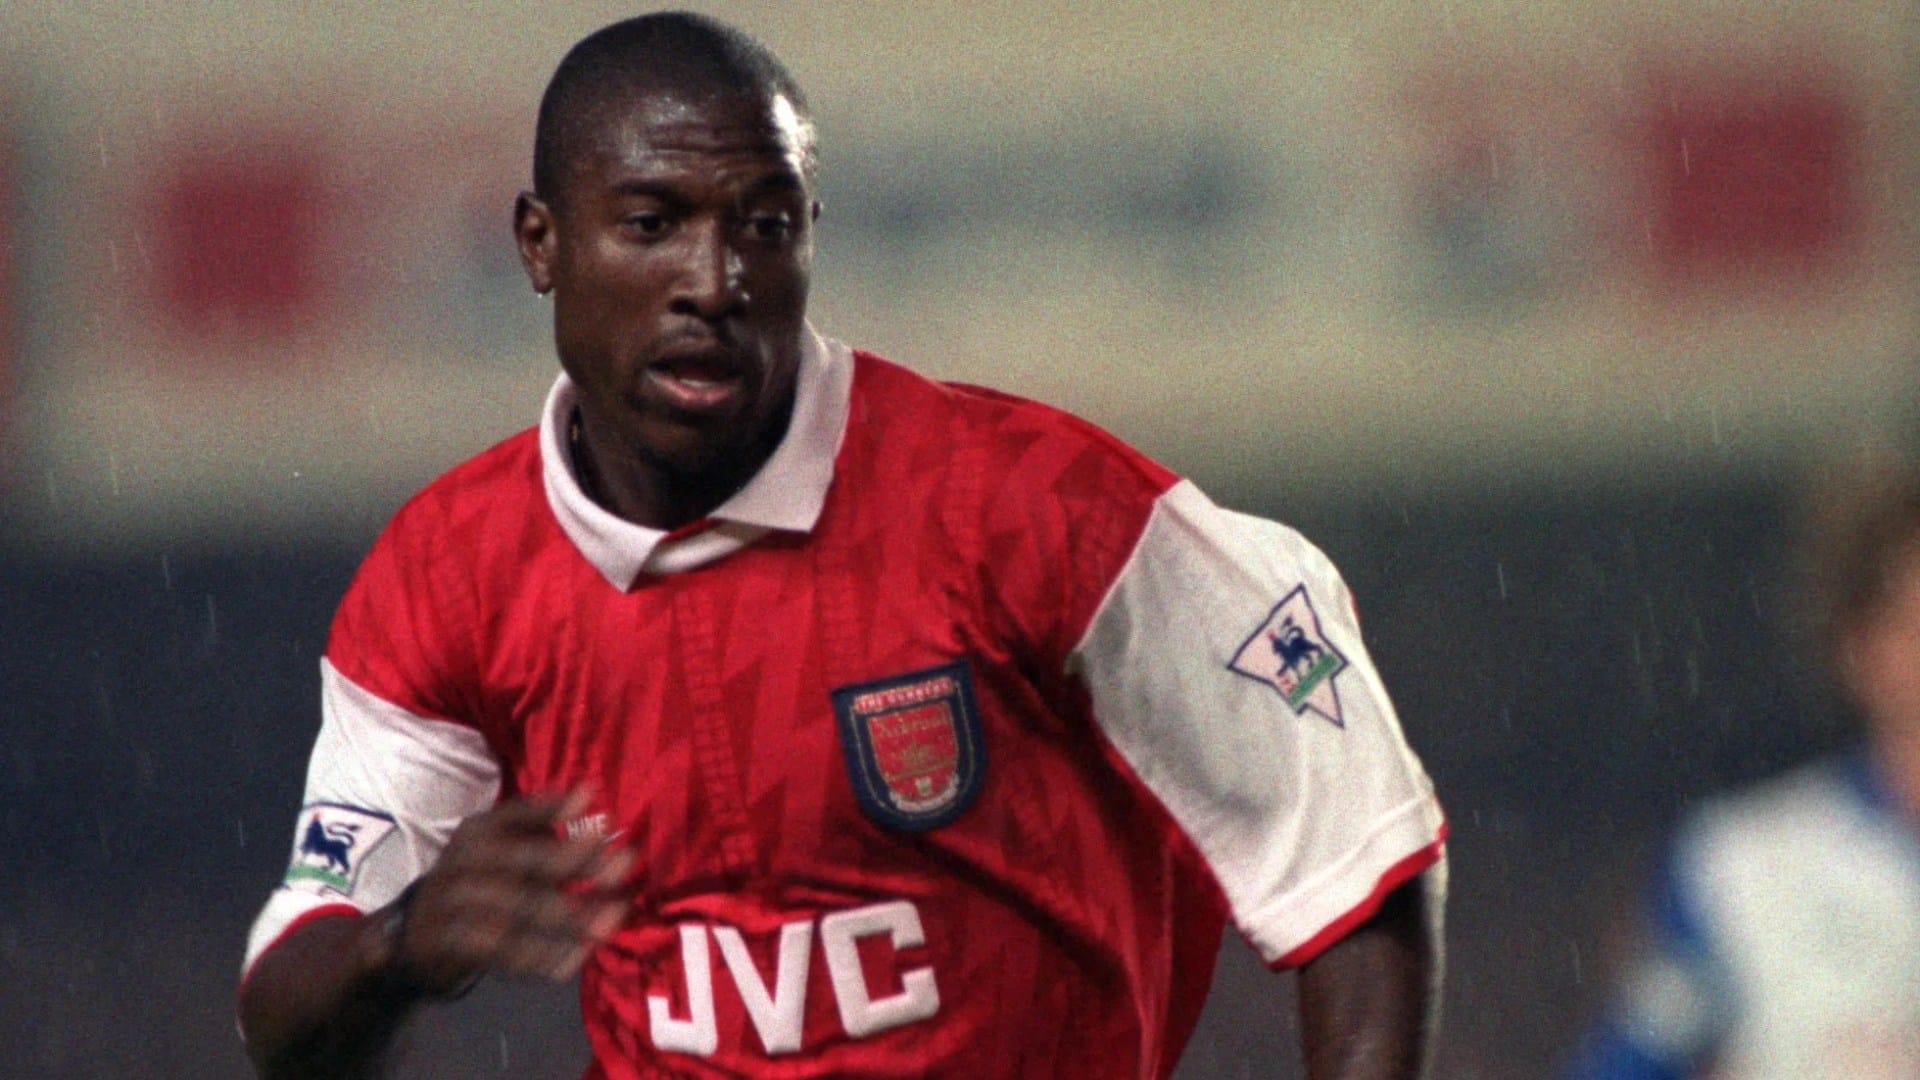 Arsenal legend Kevin Campbell died from organ failure in hospital as concerns raised over his care, inquest told